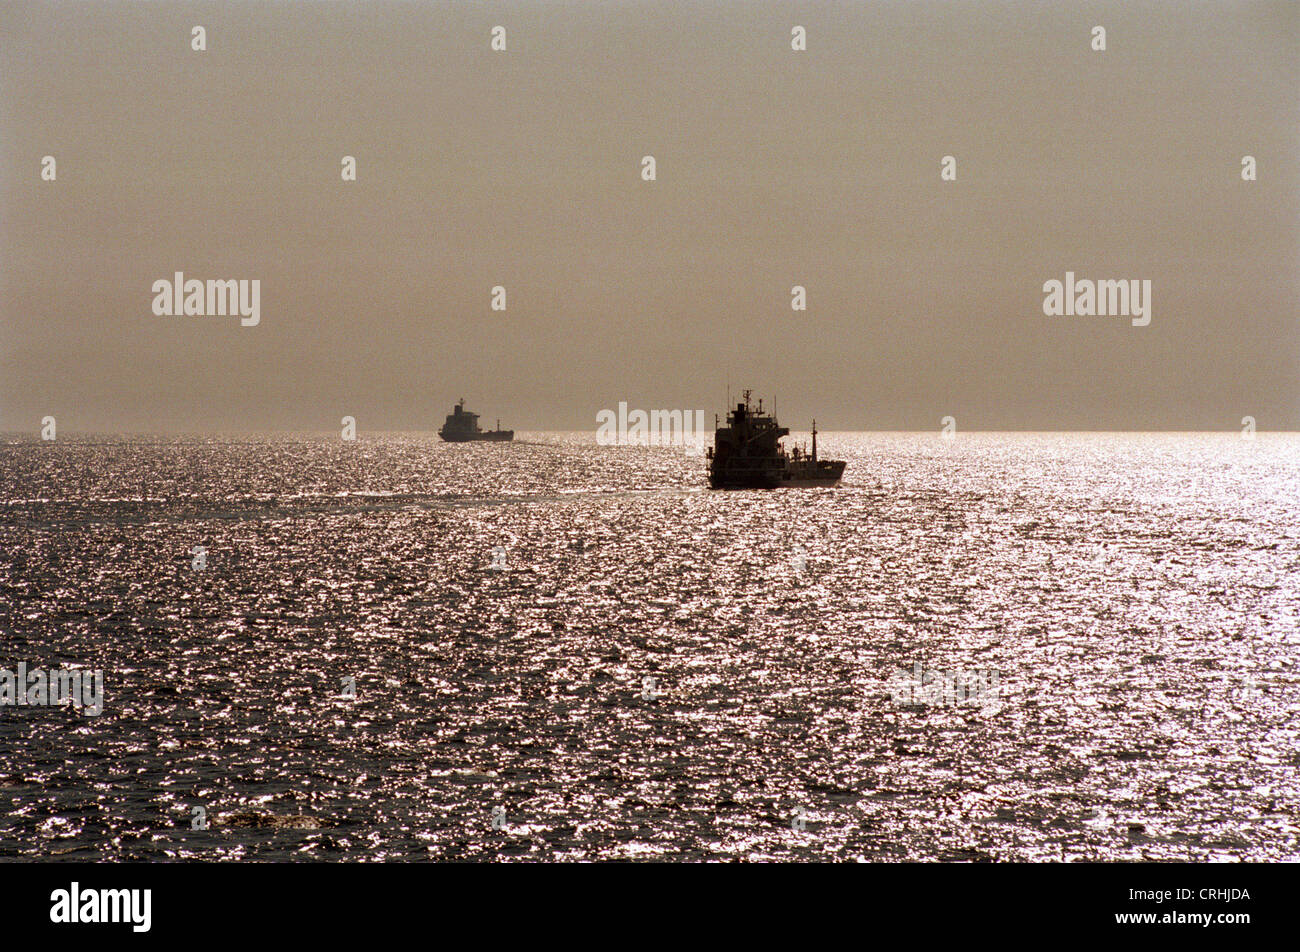 Gulf of Mecklenburg, Baltic Sea, Germany, cargo ships in the evening light Stock Photo